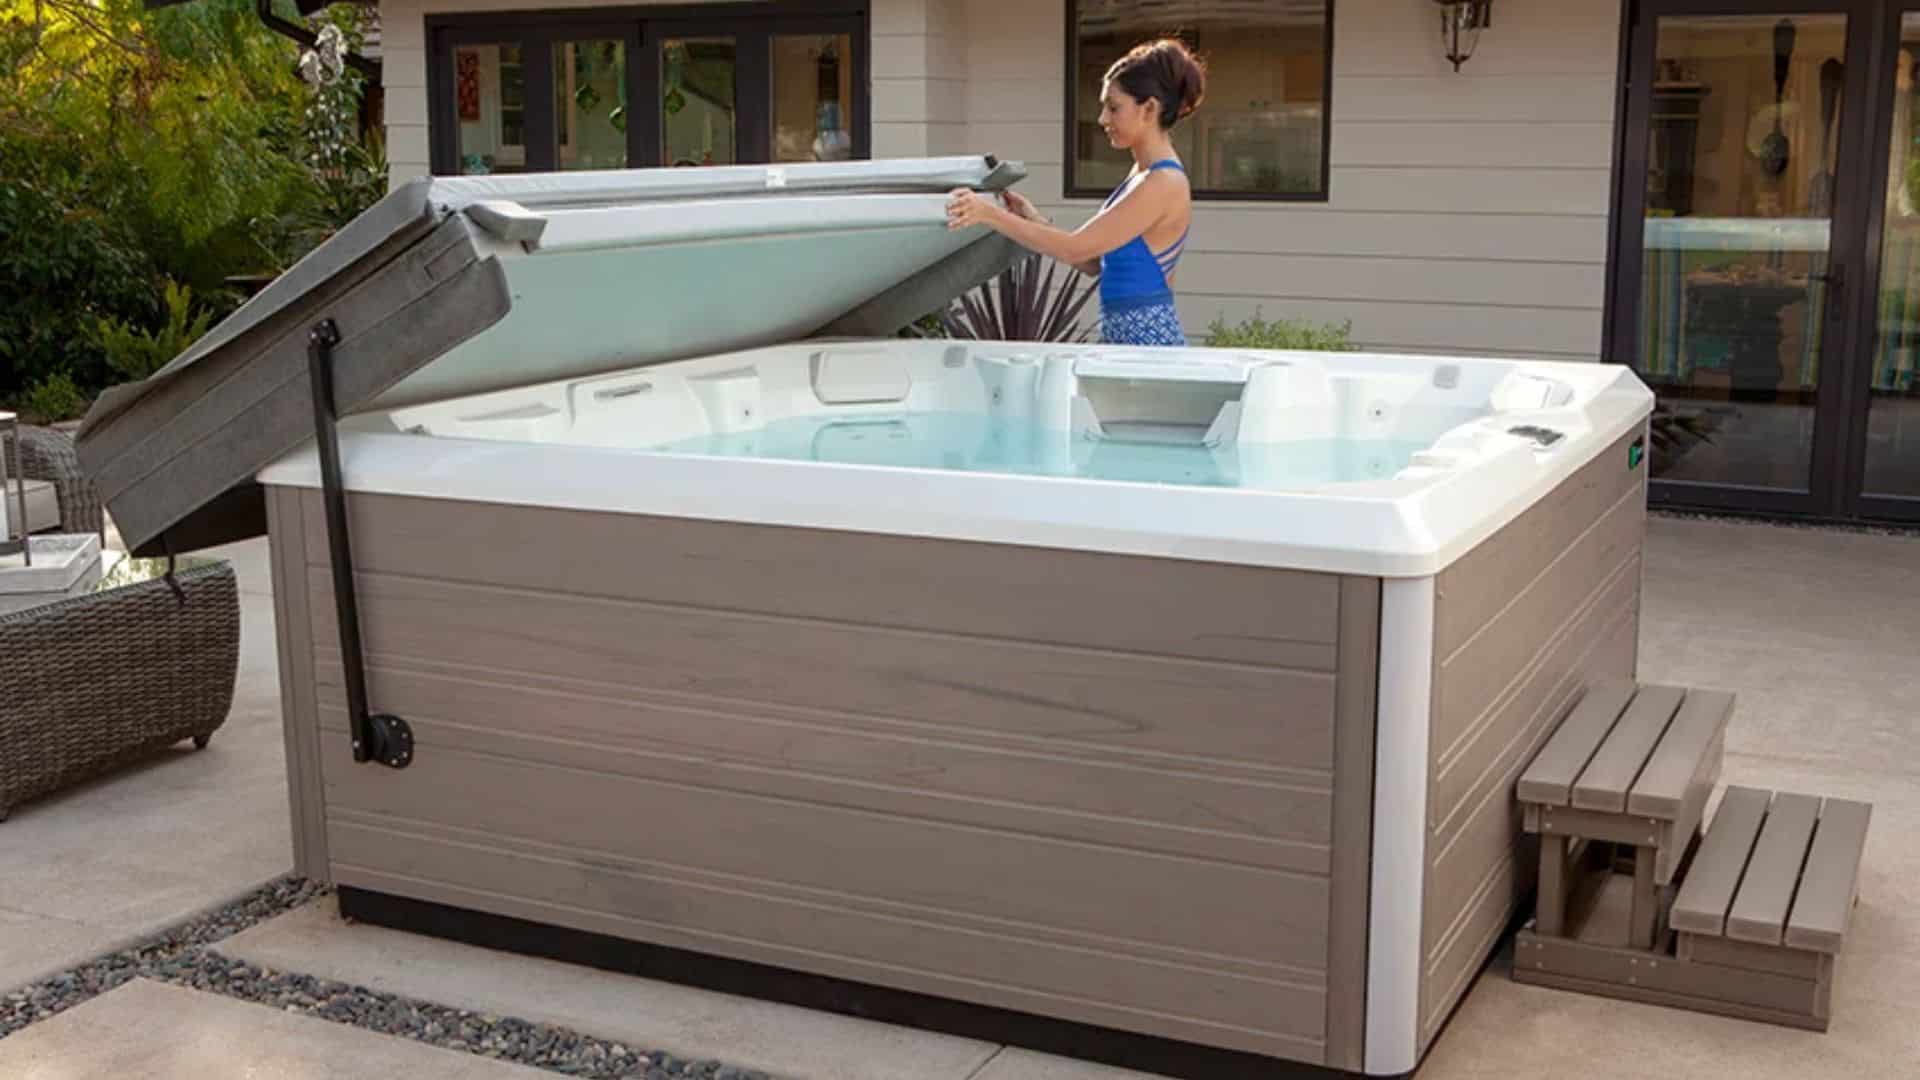 6 Best Hot Tub Accessories for a Hot Spring Spa